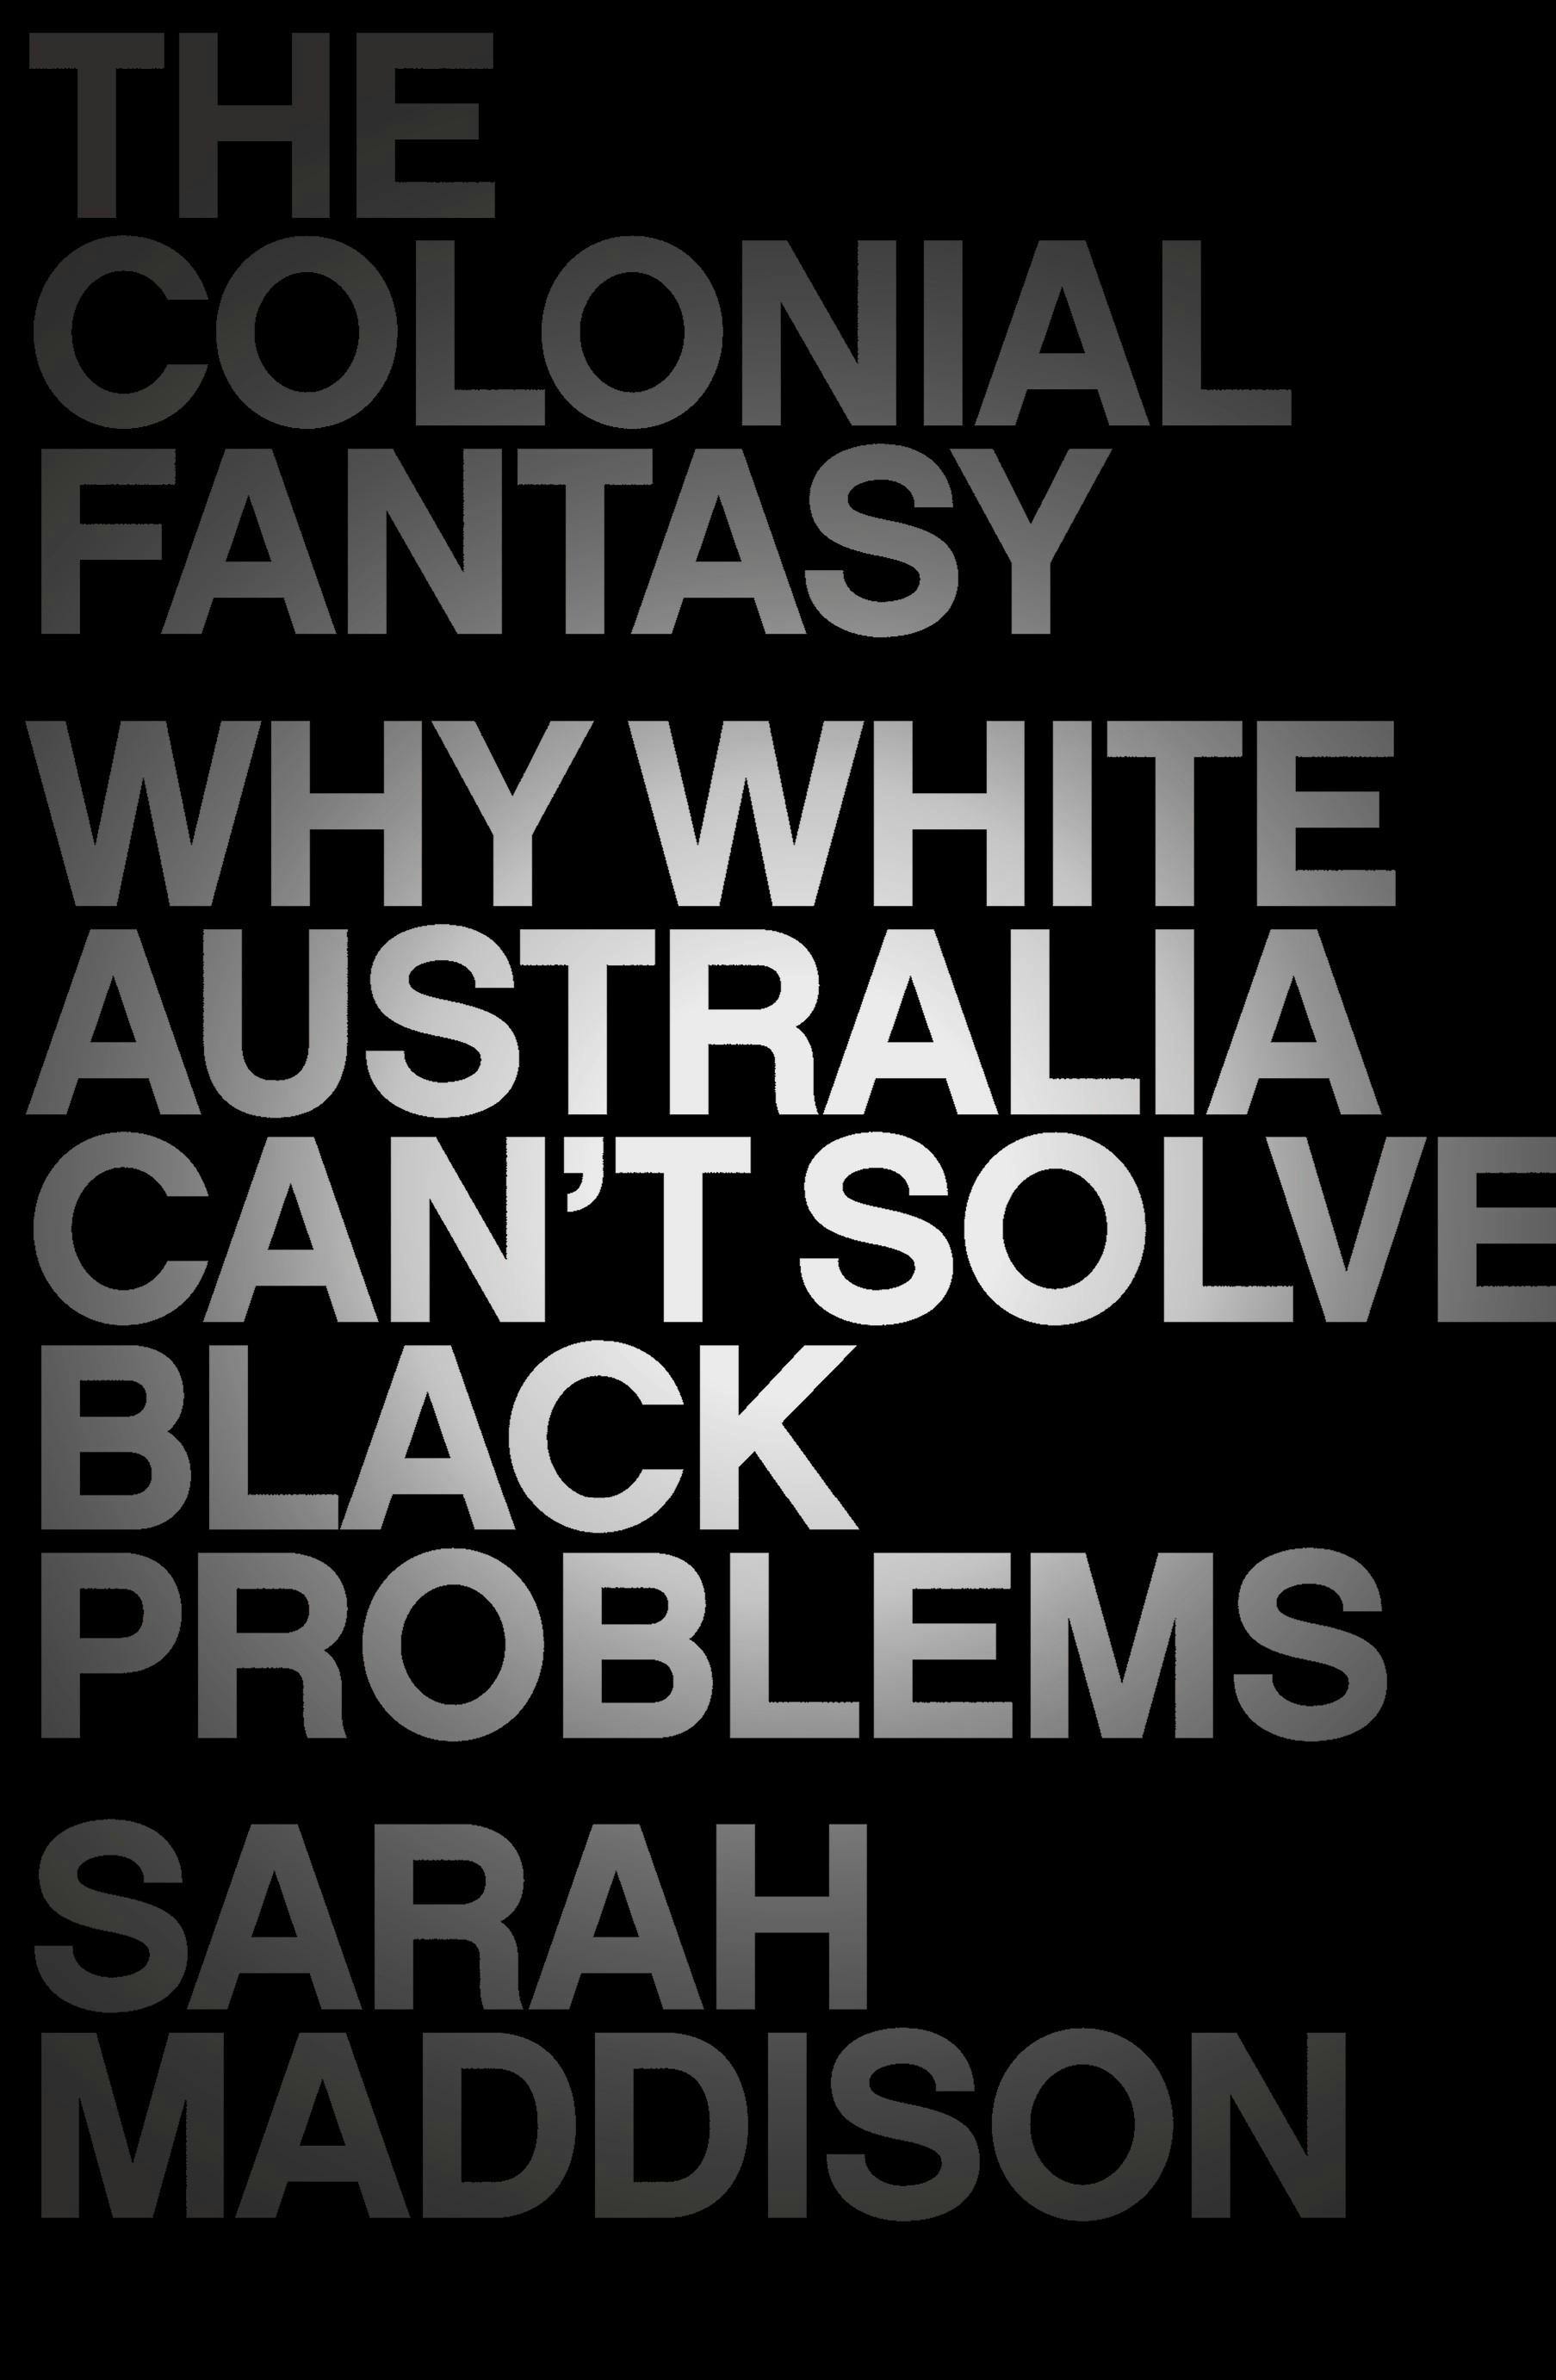 The Colonial Fantasy Why white Australia can't solve black problems